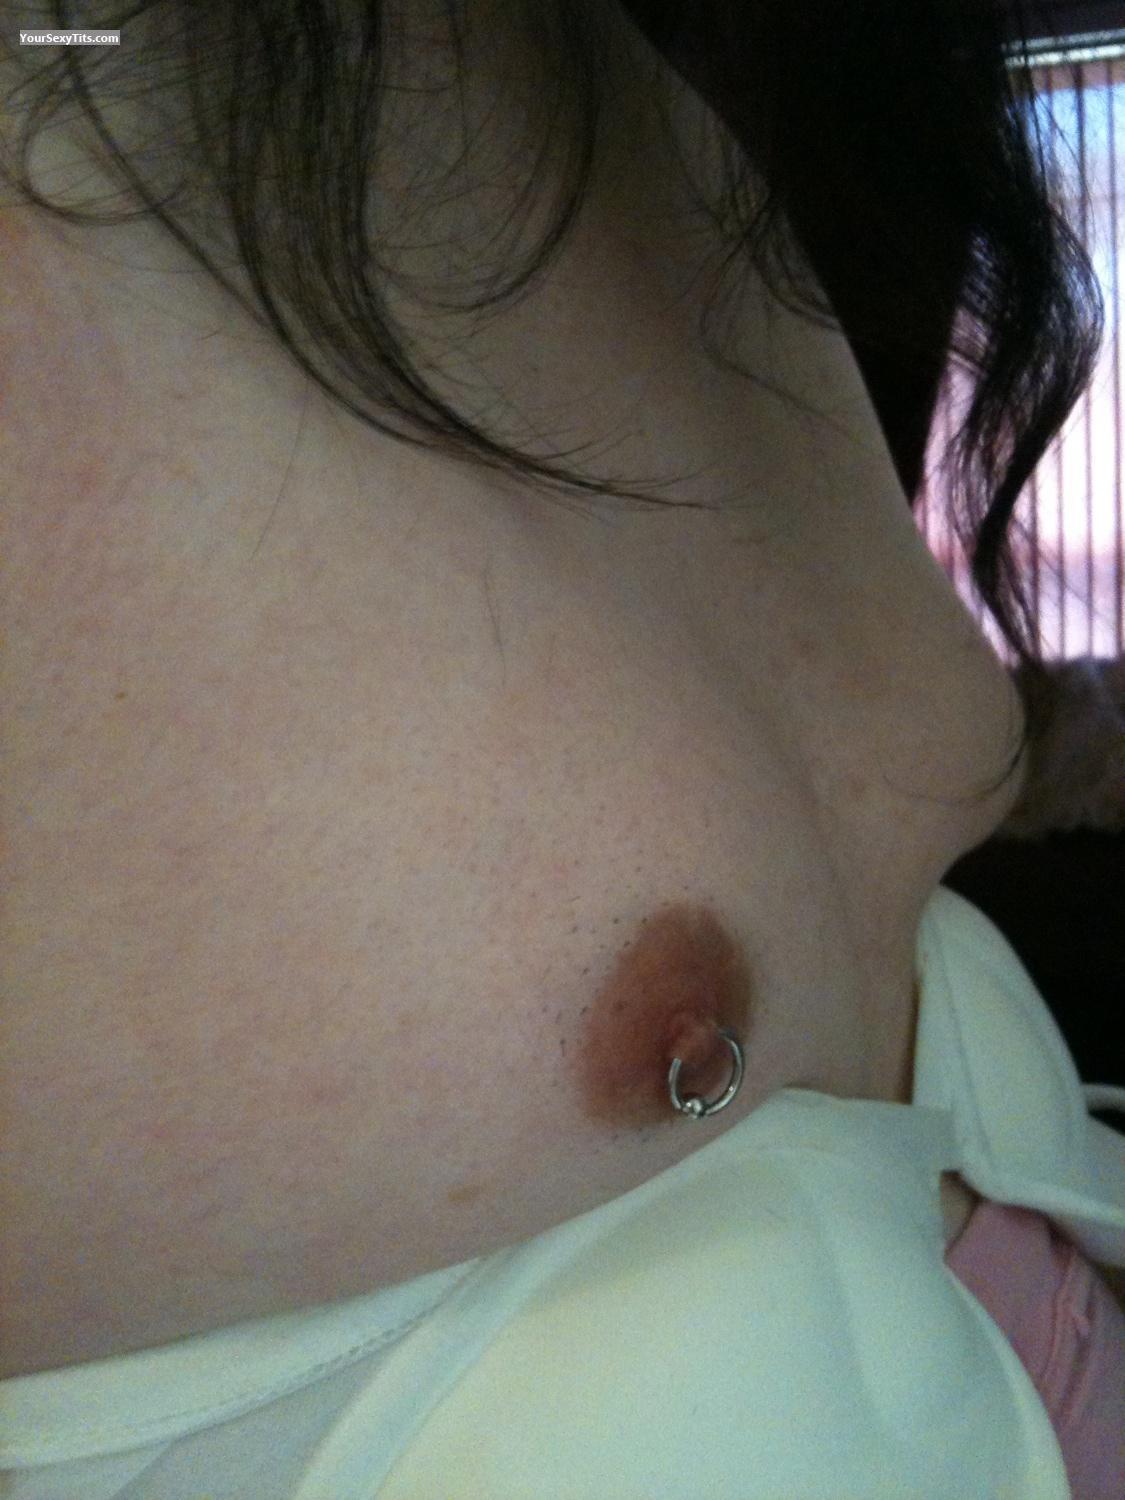 Tit Flash: My Very Small Tits By IPhone (Selfie) - Cocks4me from AustraliaPierced Nipples 